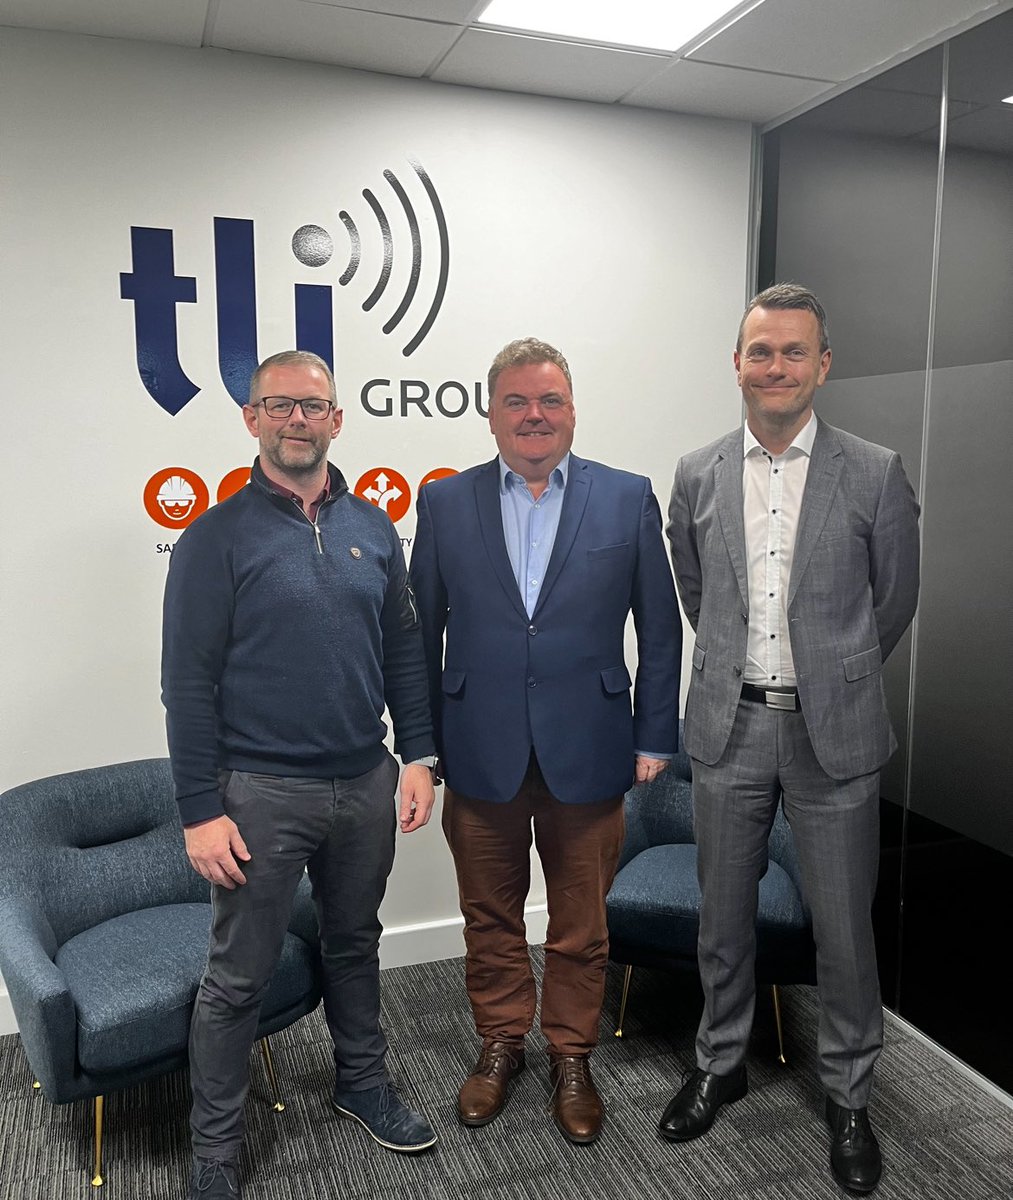 Great visit to TLI Cork this morning with MD John Tuite and Ruairi Geary. 1200 people employed by the group with 31 nationalities working for them here in Ireland. A real growth story.